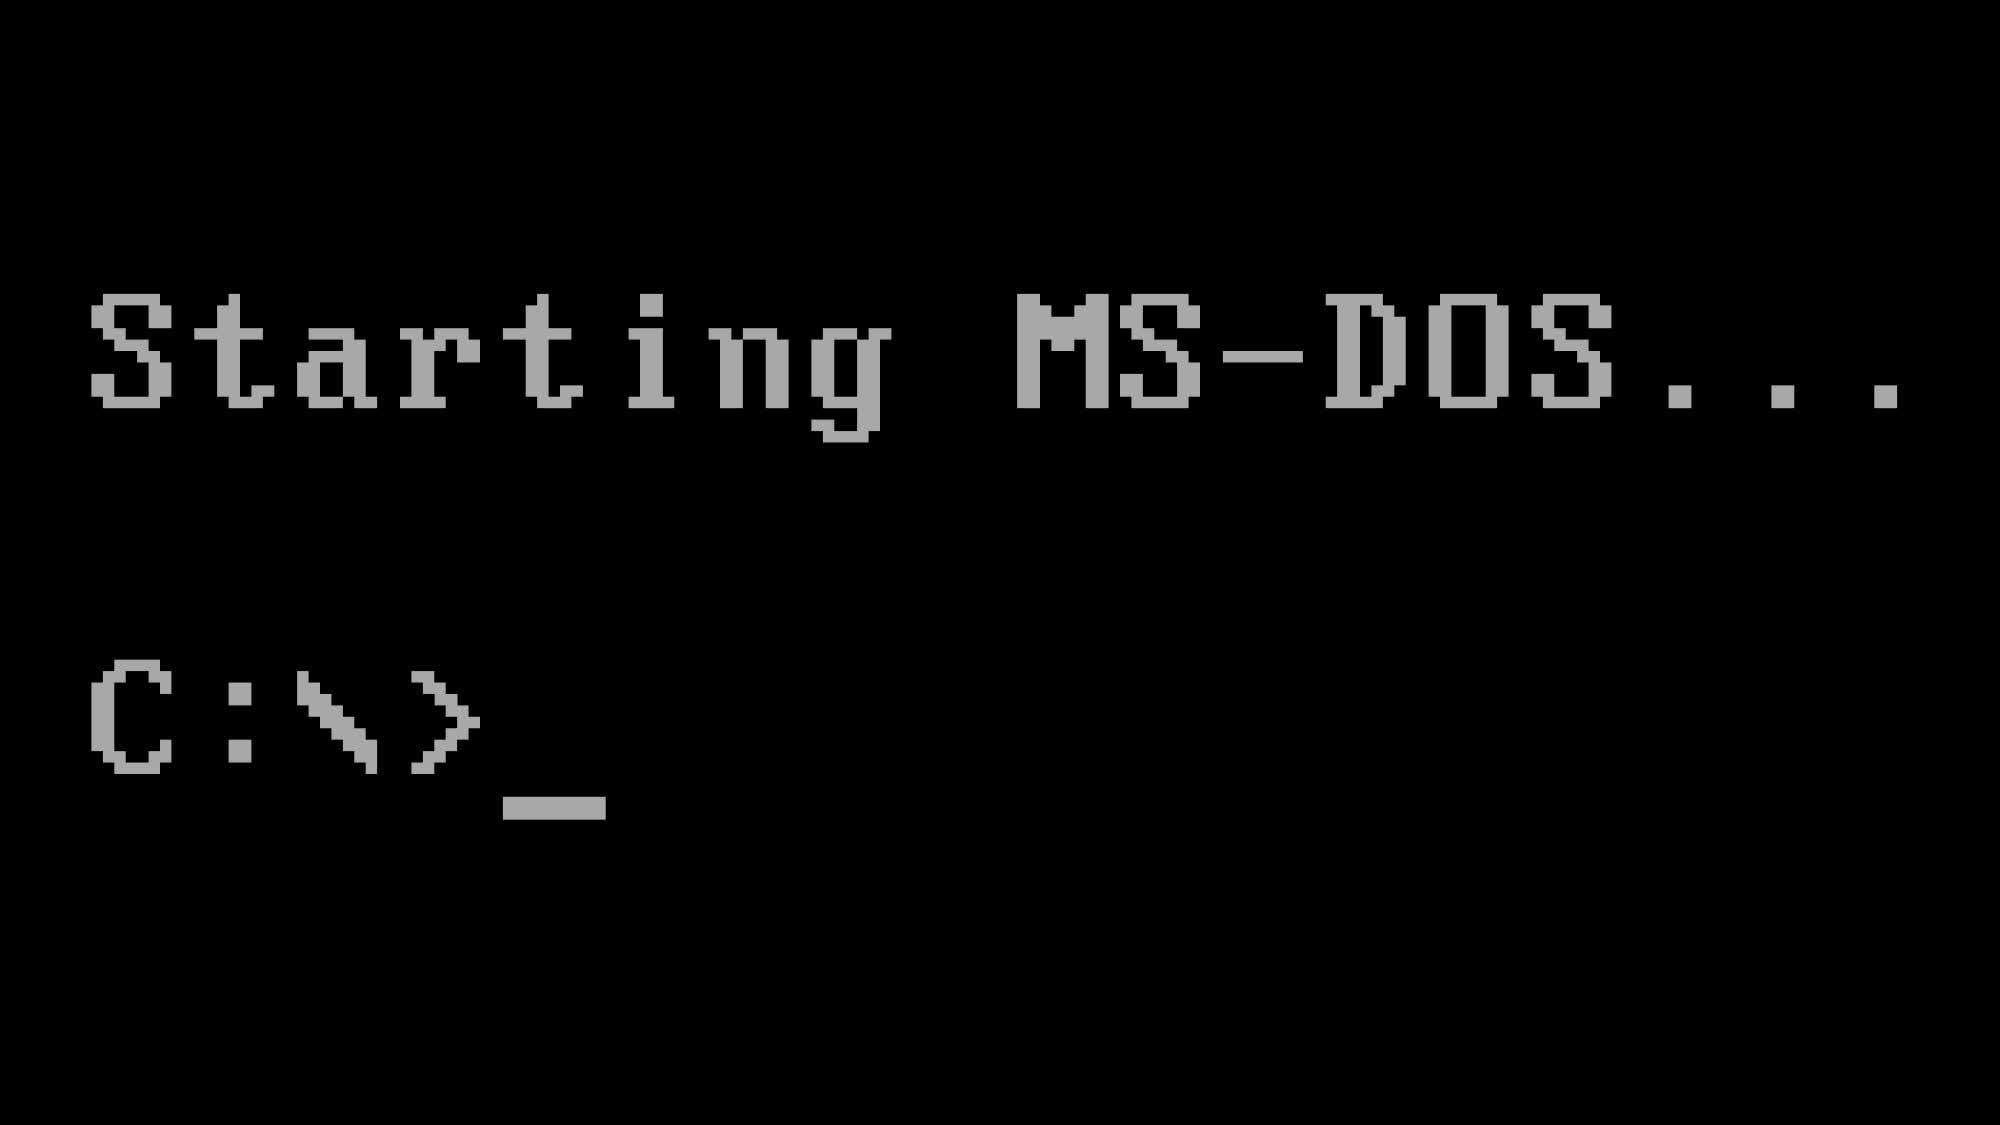 The oldest release of MS-DOS precursor 86-DOS is now available for download